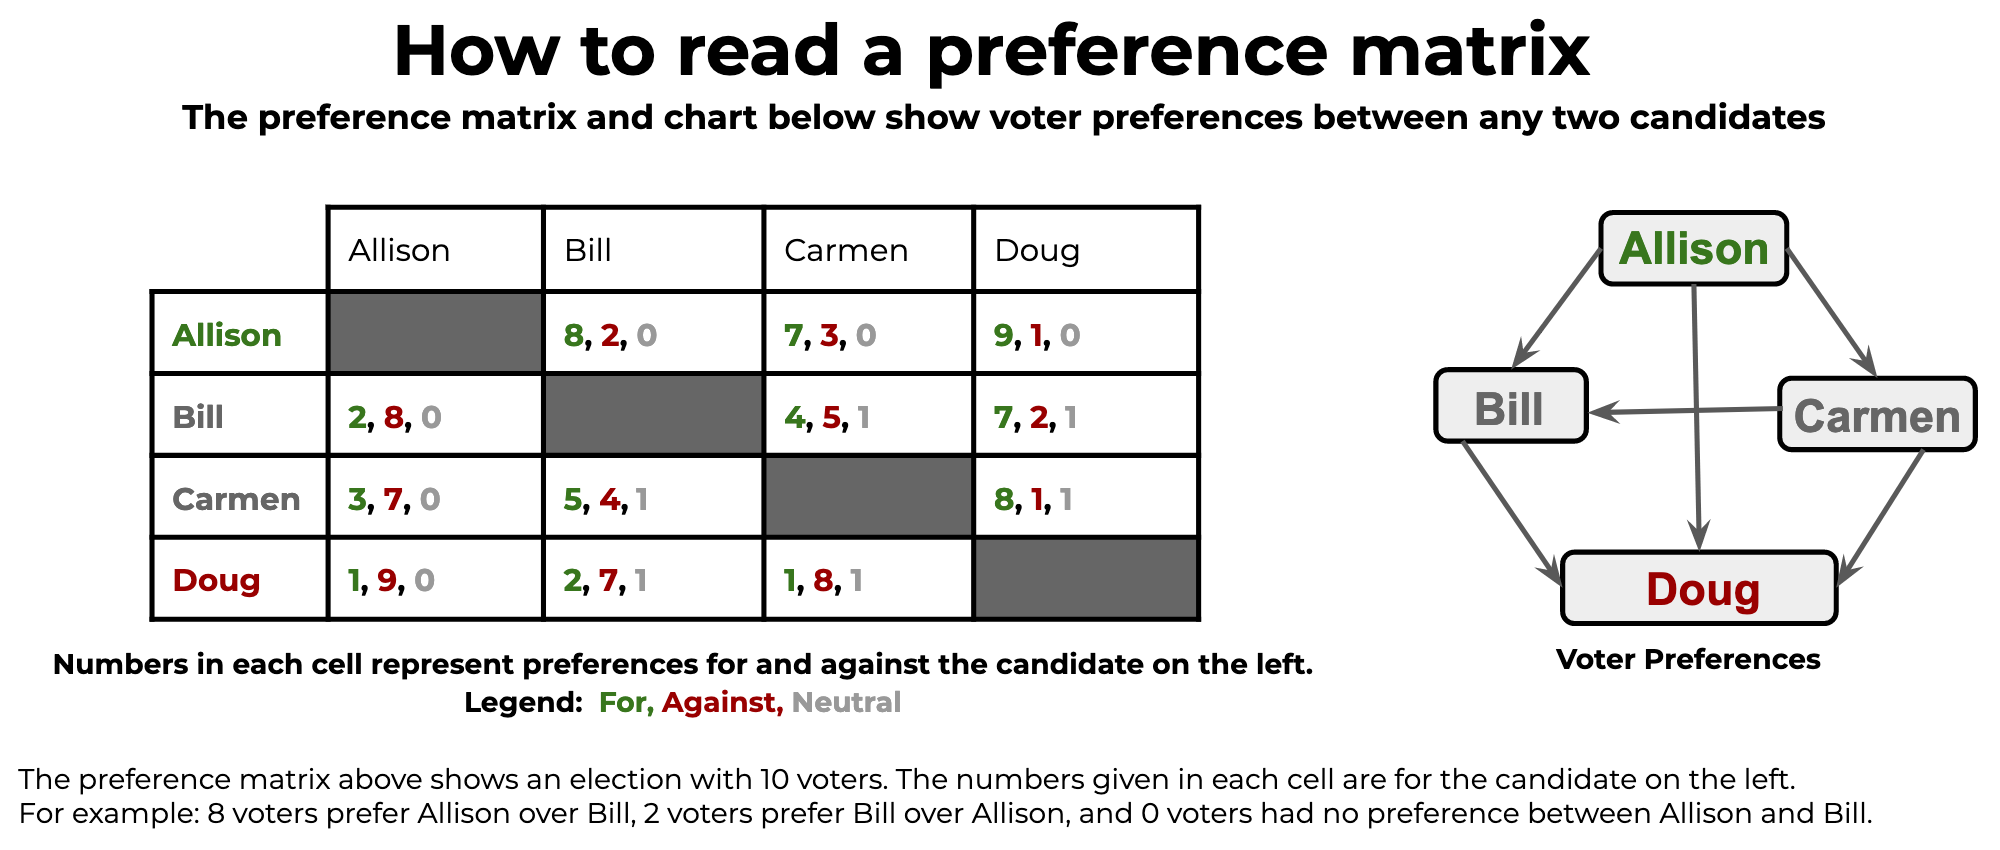 An example preference matrix with instructions for reading it